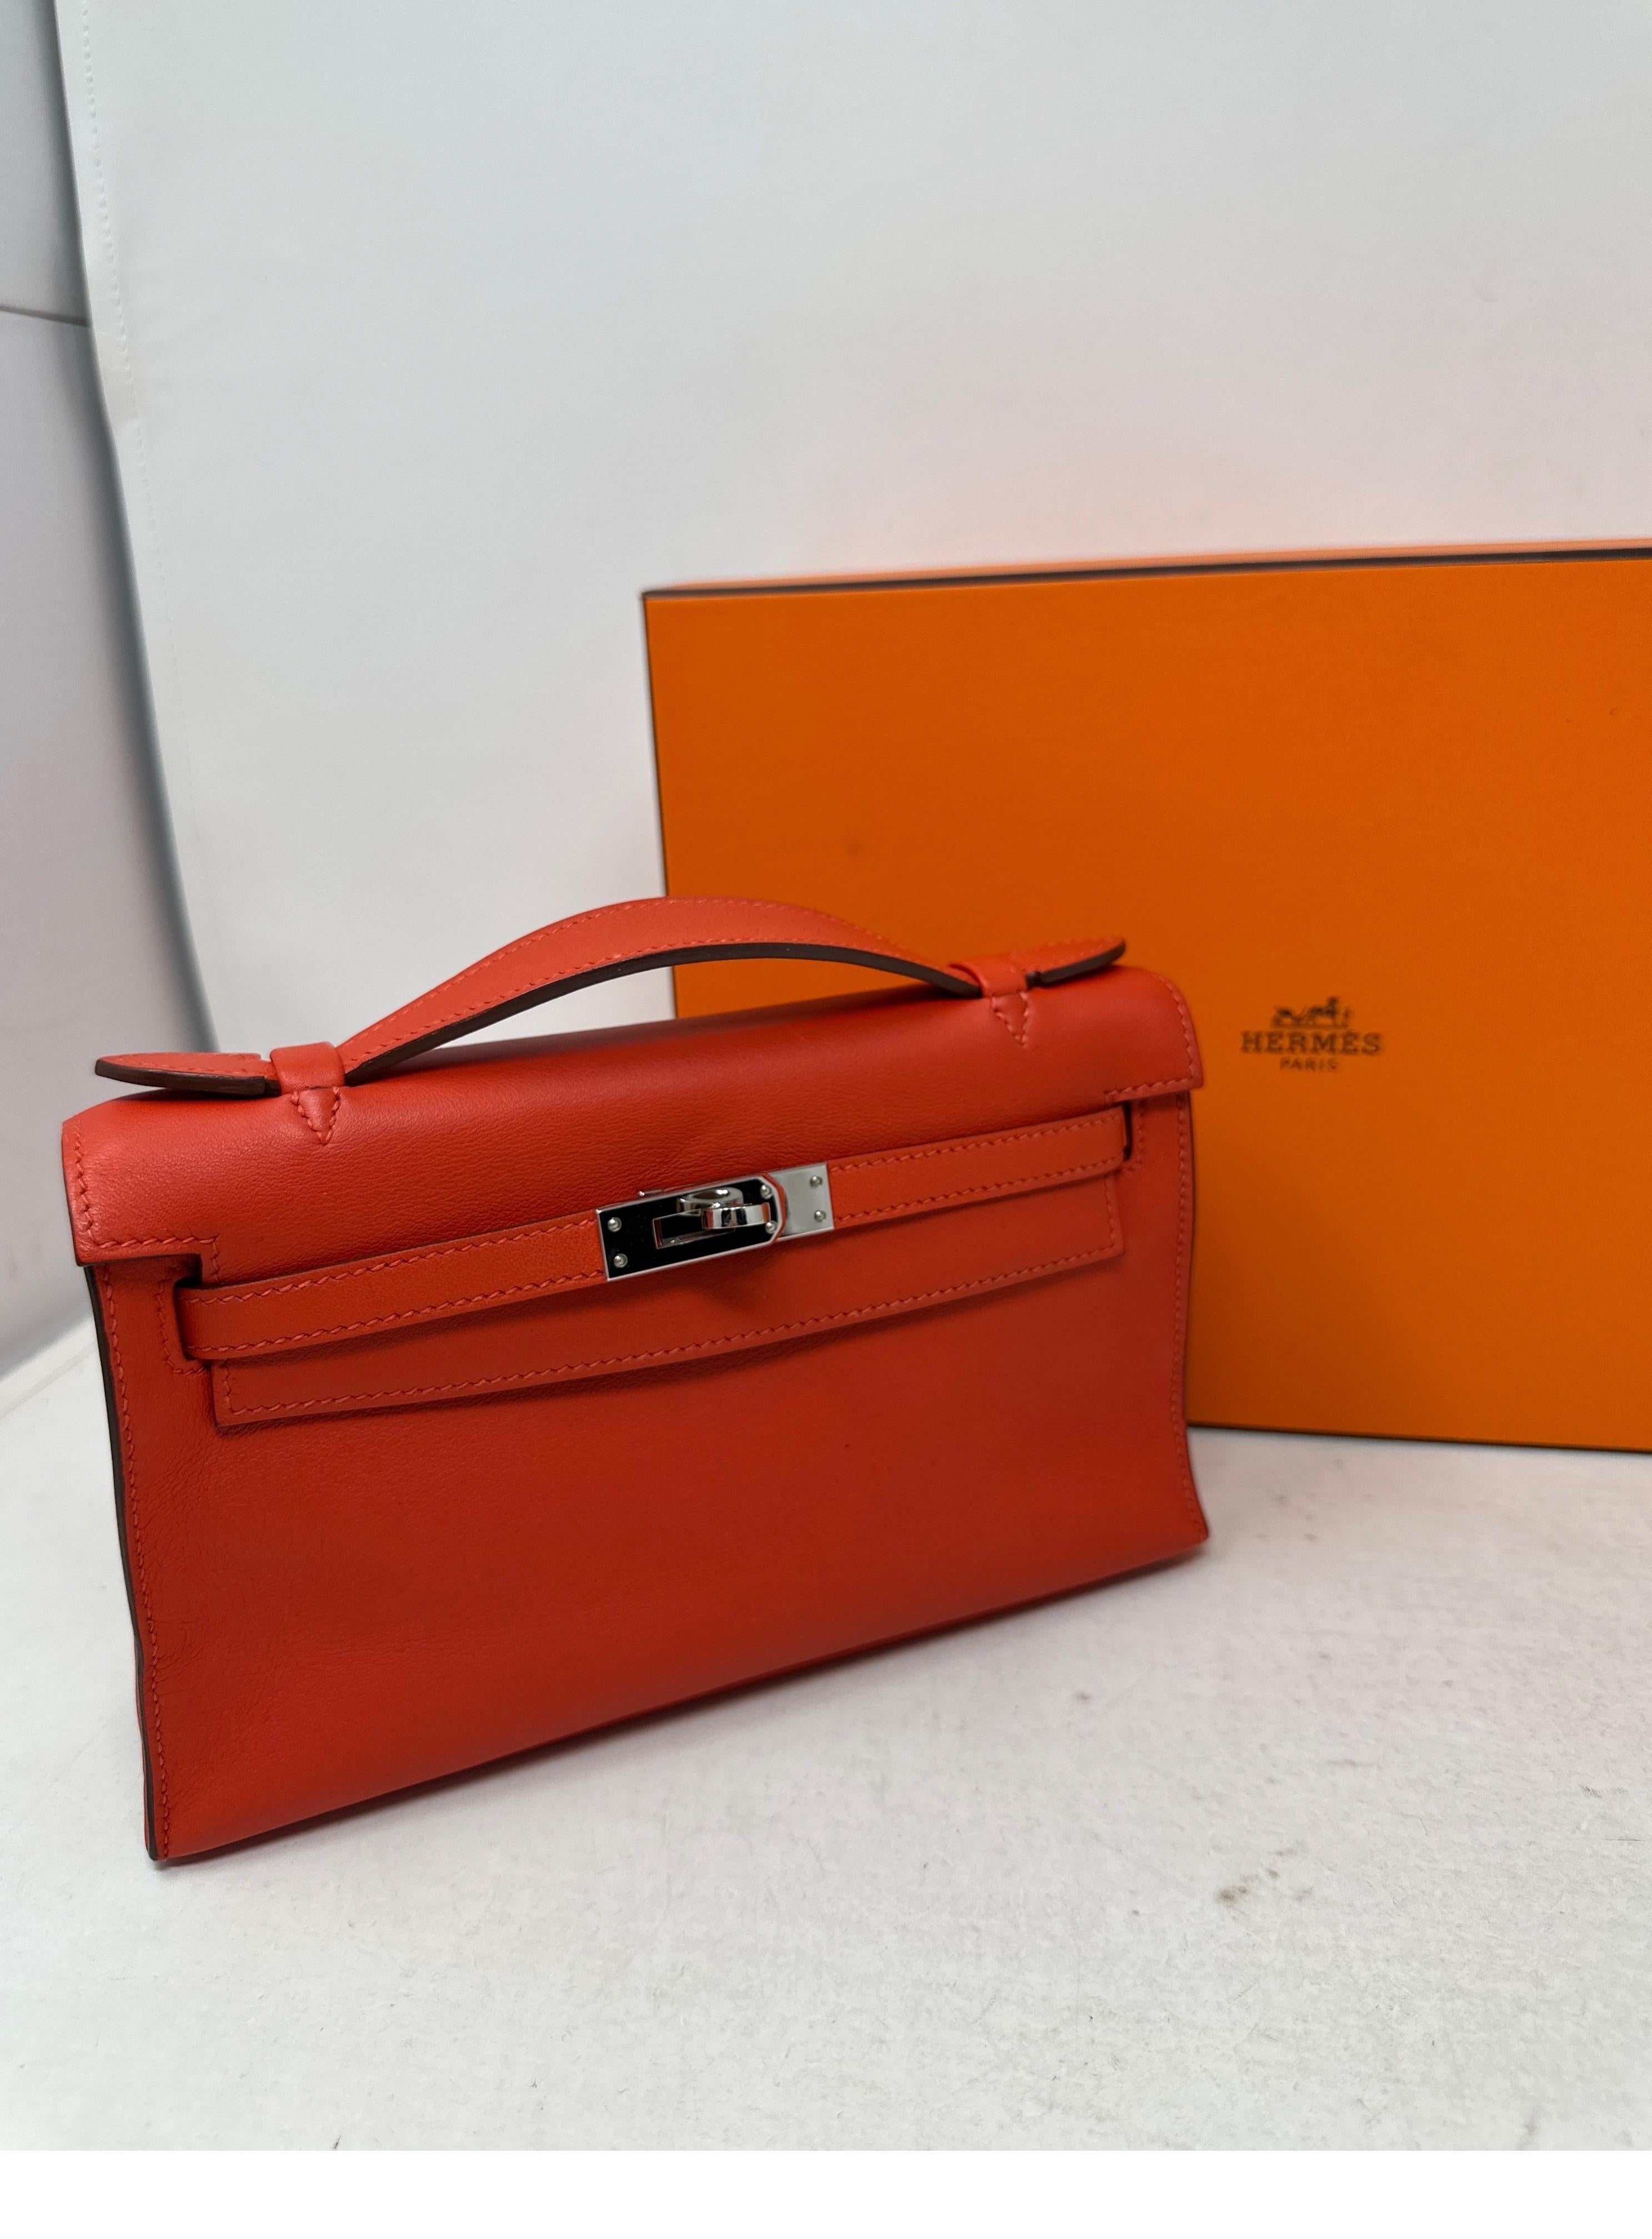 Hermes Kelly Orange Pochette In Excellent Condition For Sale In Athens, GA